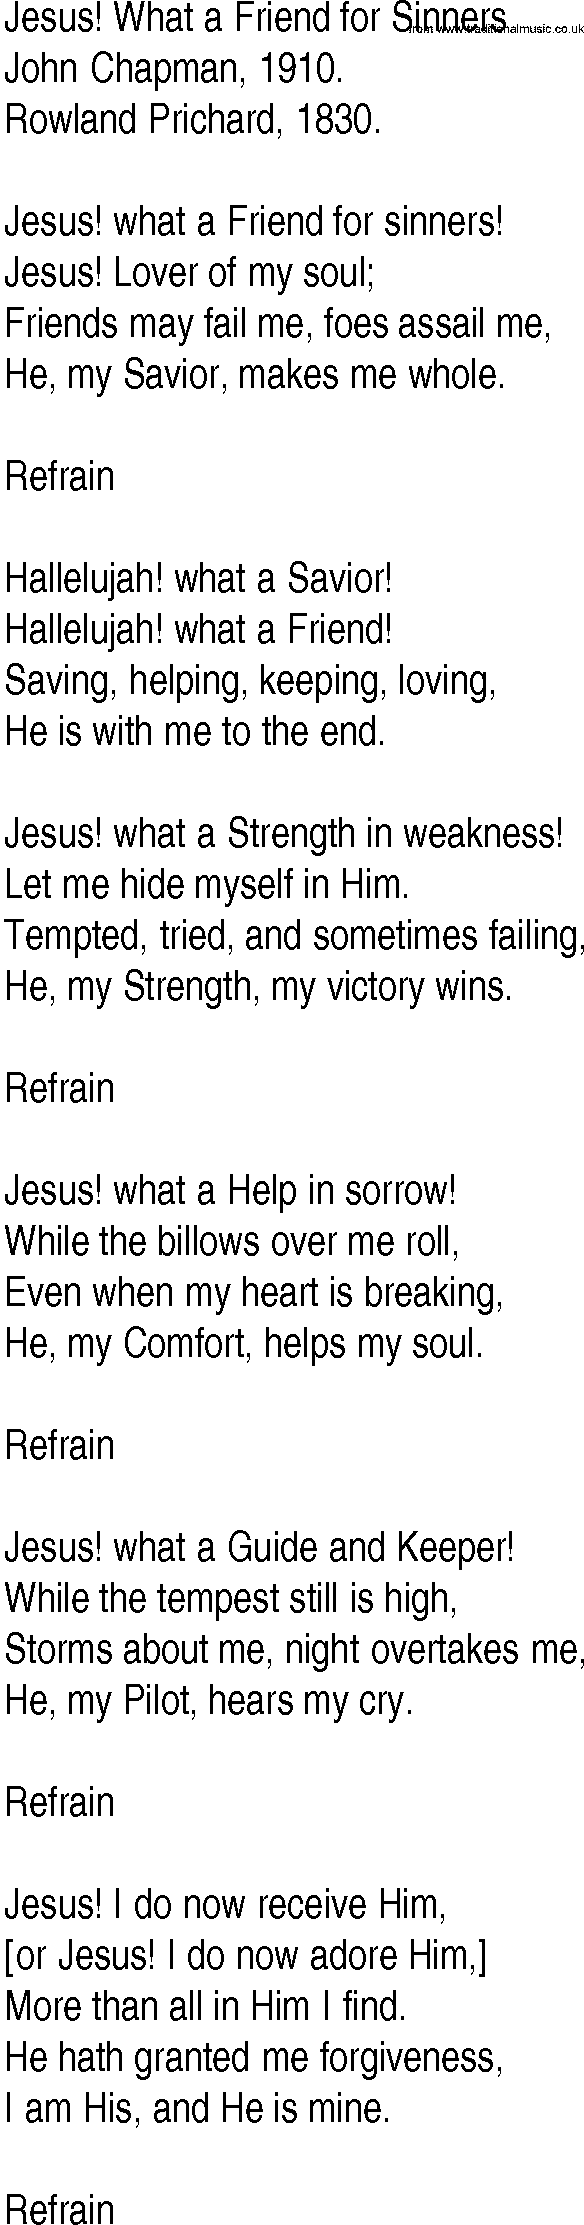 Hymn and Gospel Song: Jesus! What a Friend for Sinners by John Chapman lyrics